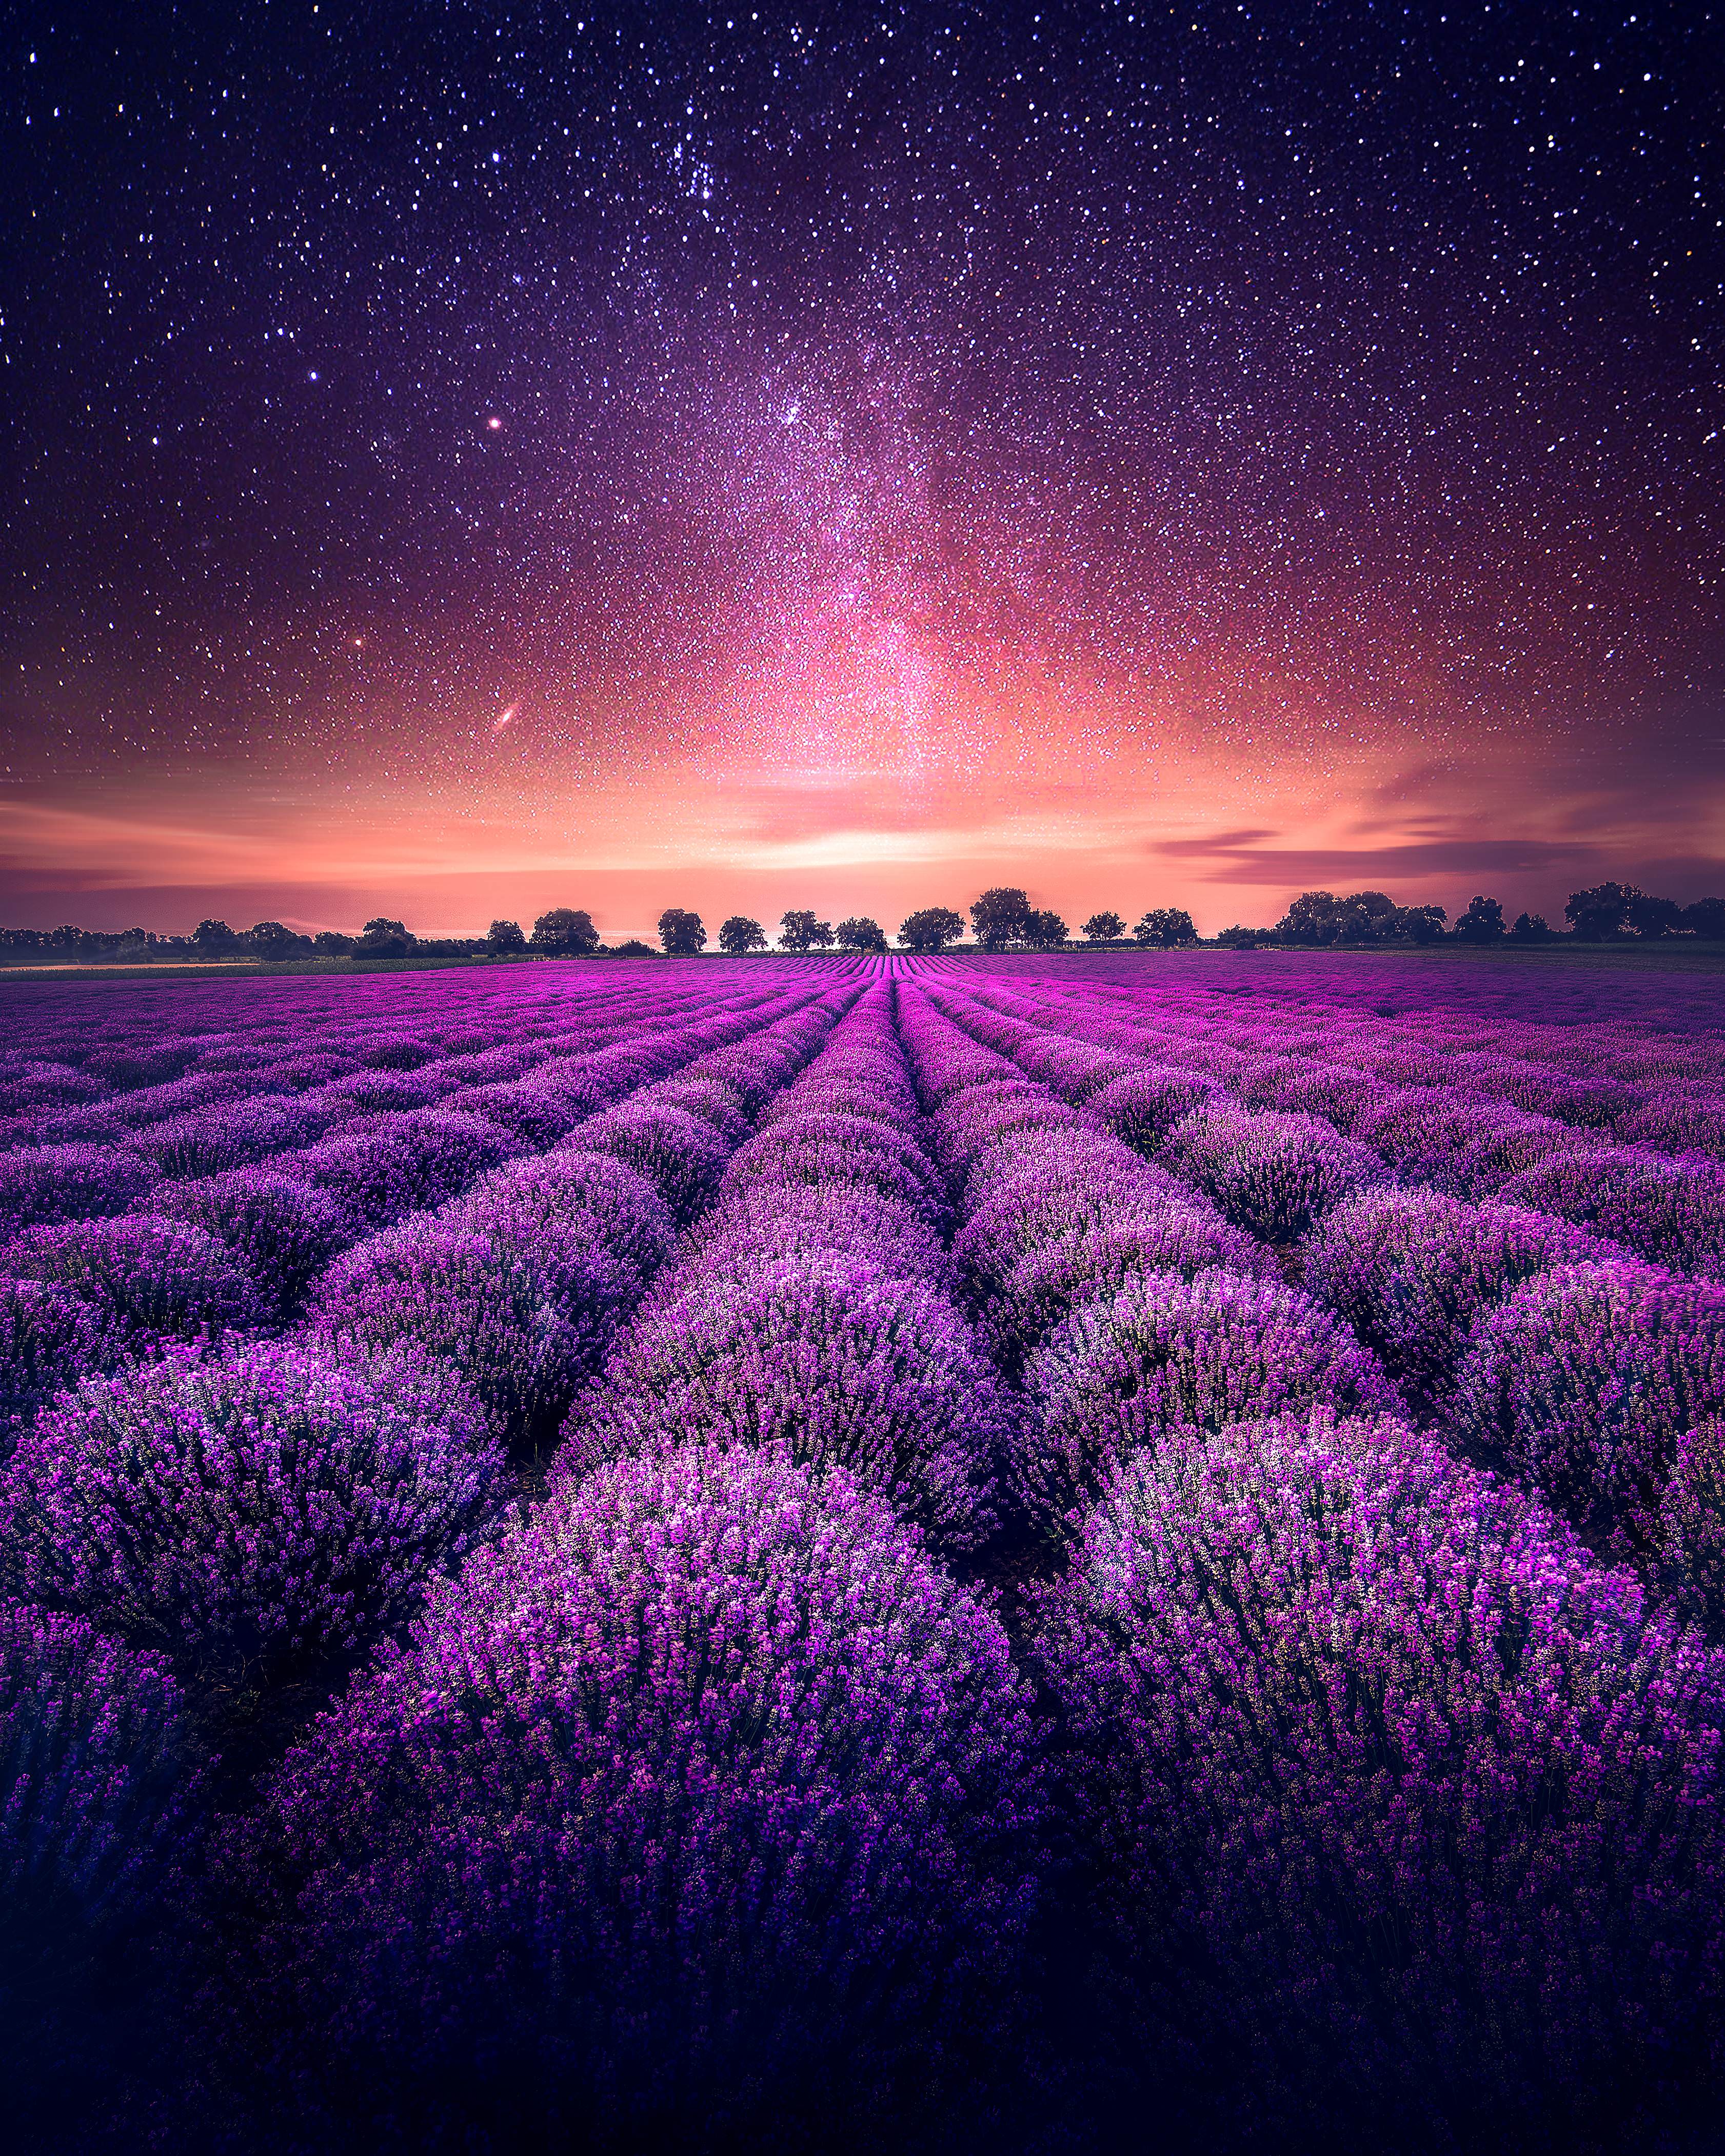 83128 download wallpaper lavender, nature, starry sky, horizon, field screensavers and pictures for free